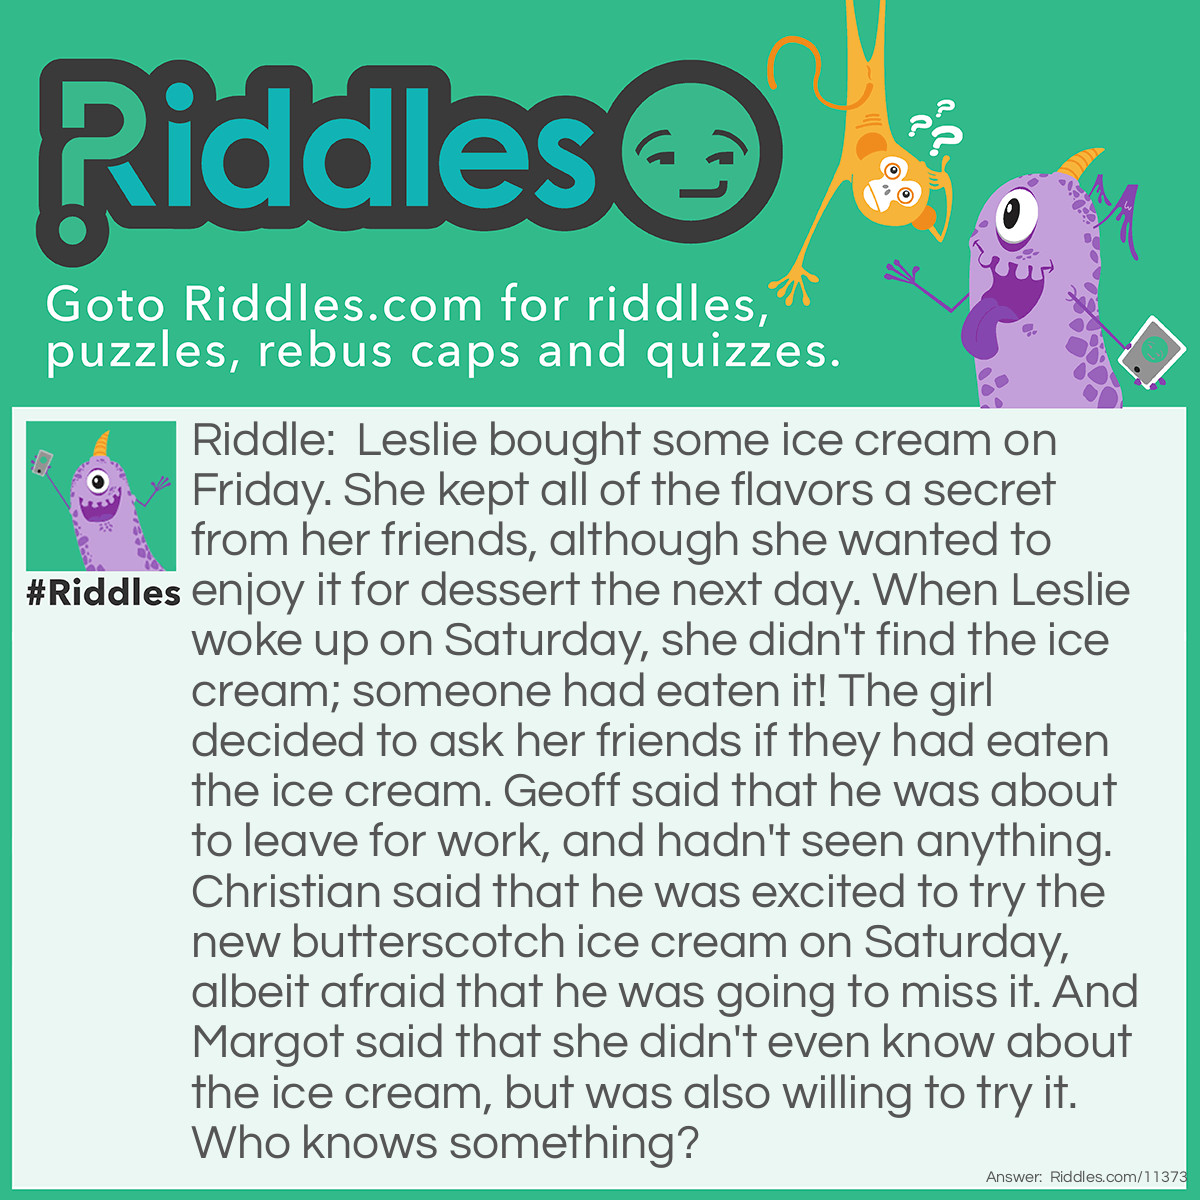 Riddle: Leslie bought some ice cream on Friday. She kept all of the flavors a secret from her friends, although she wanted to enjoy it for dessert the next day. When Leslie woke up on Saturday, she didn't find the ice cream; someone had eaten it! The girl decided to ask her friends if they had eaten the ice cream. Geoff said that he was about to leave for work, and hadn't seen anything. Christian said that he was excited to try the new butterscotch ice cream on Saturday, albeit afraid that he was going to miss it. And Margot said that she didn't even know about the ice cream, but was also willing to try it. Who knows something? Answer: Christian couldn't be sure that there was a butterscotch taste among the ice cream flavors because Leslie kept all of the flavors in secret. Therefore, he knows something about the stolen ice cream.